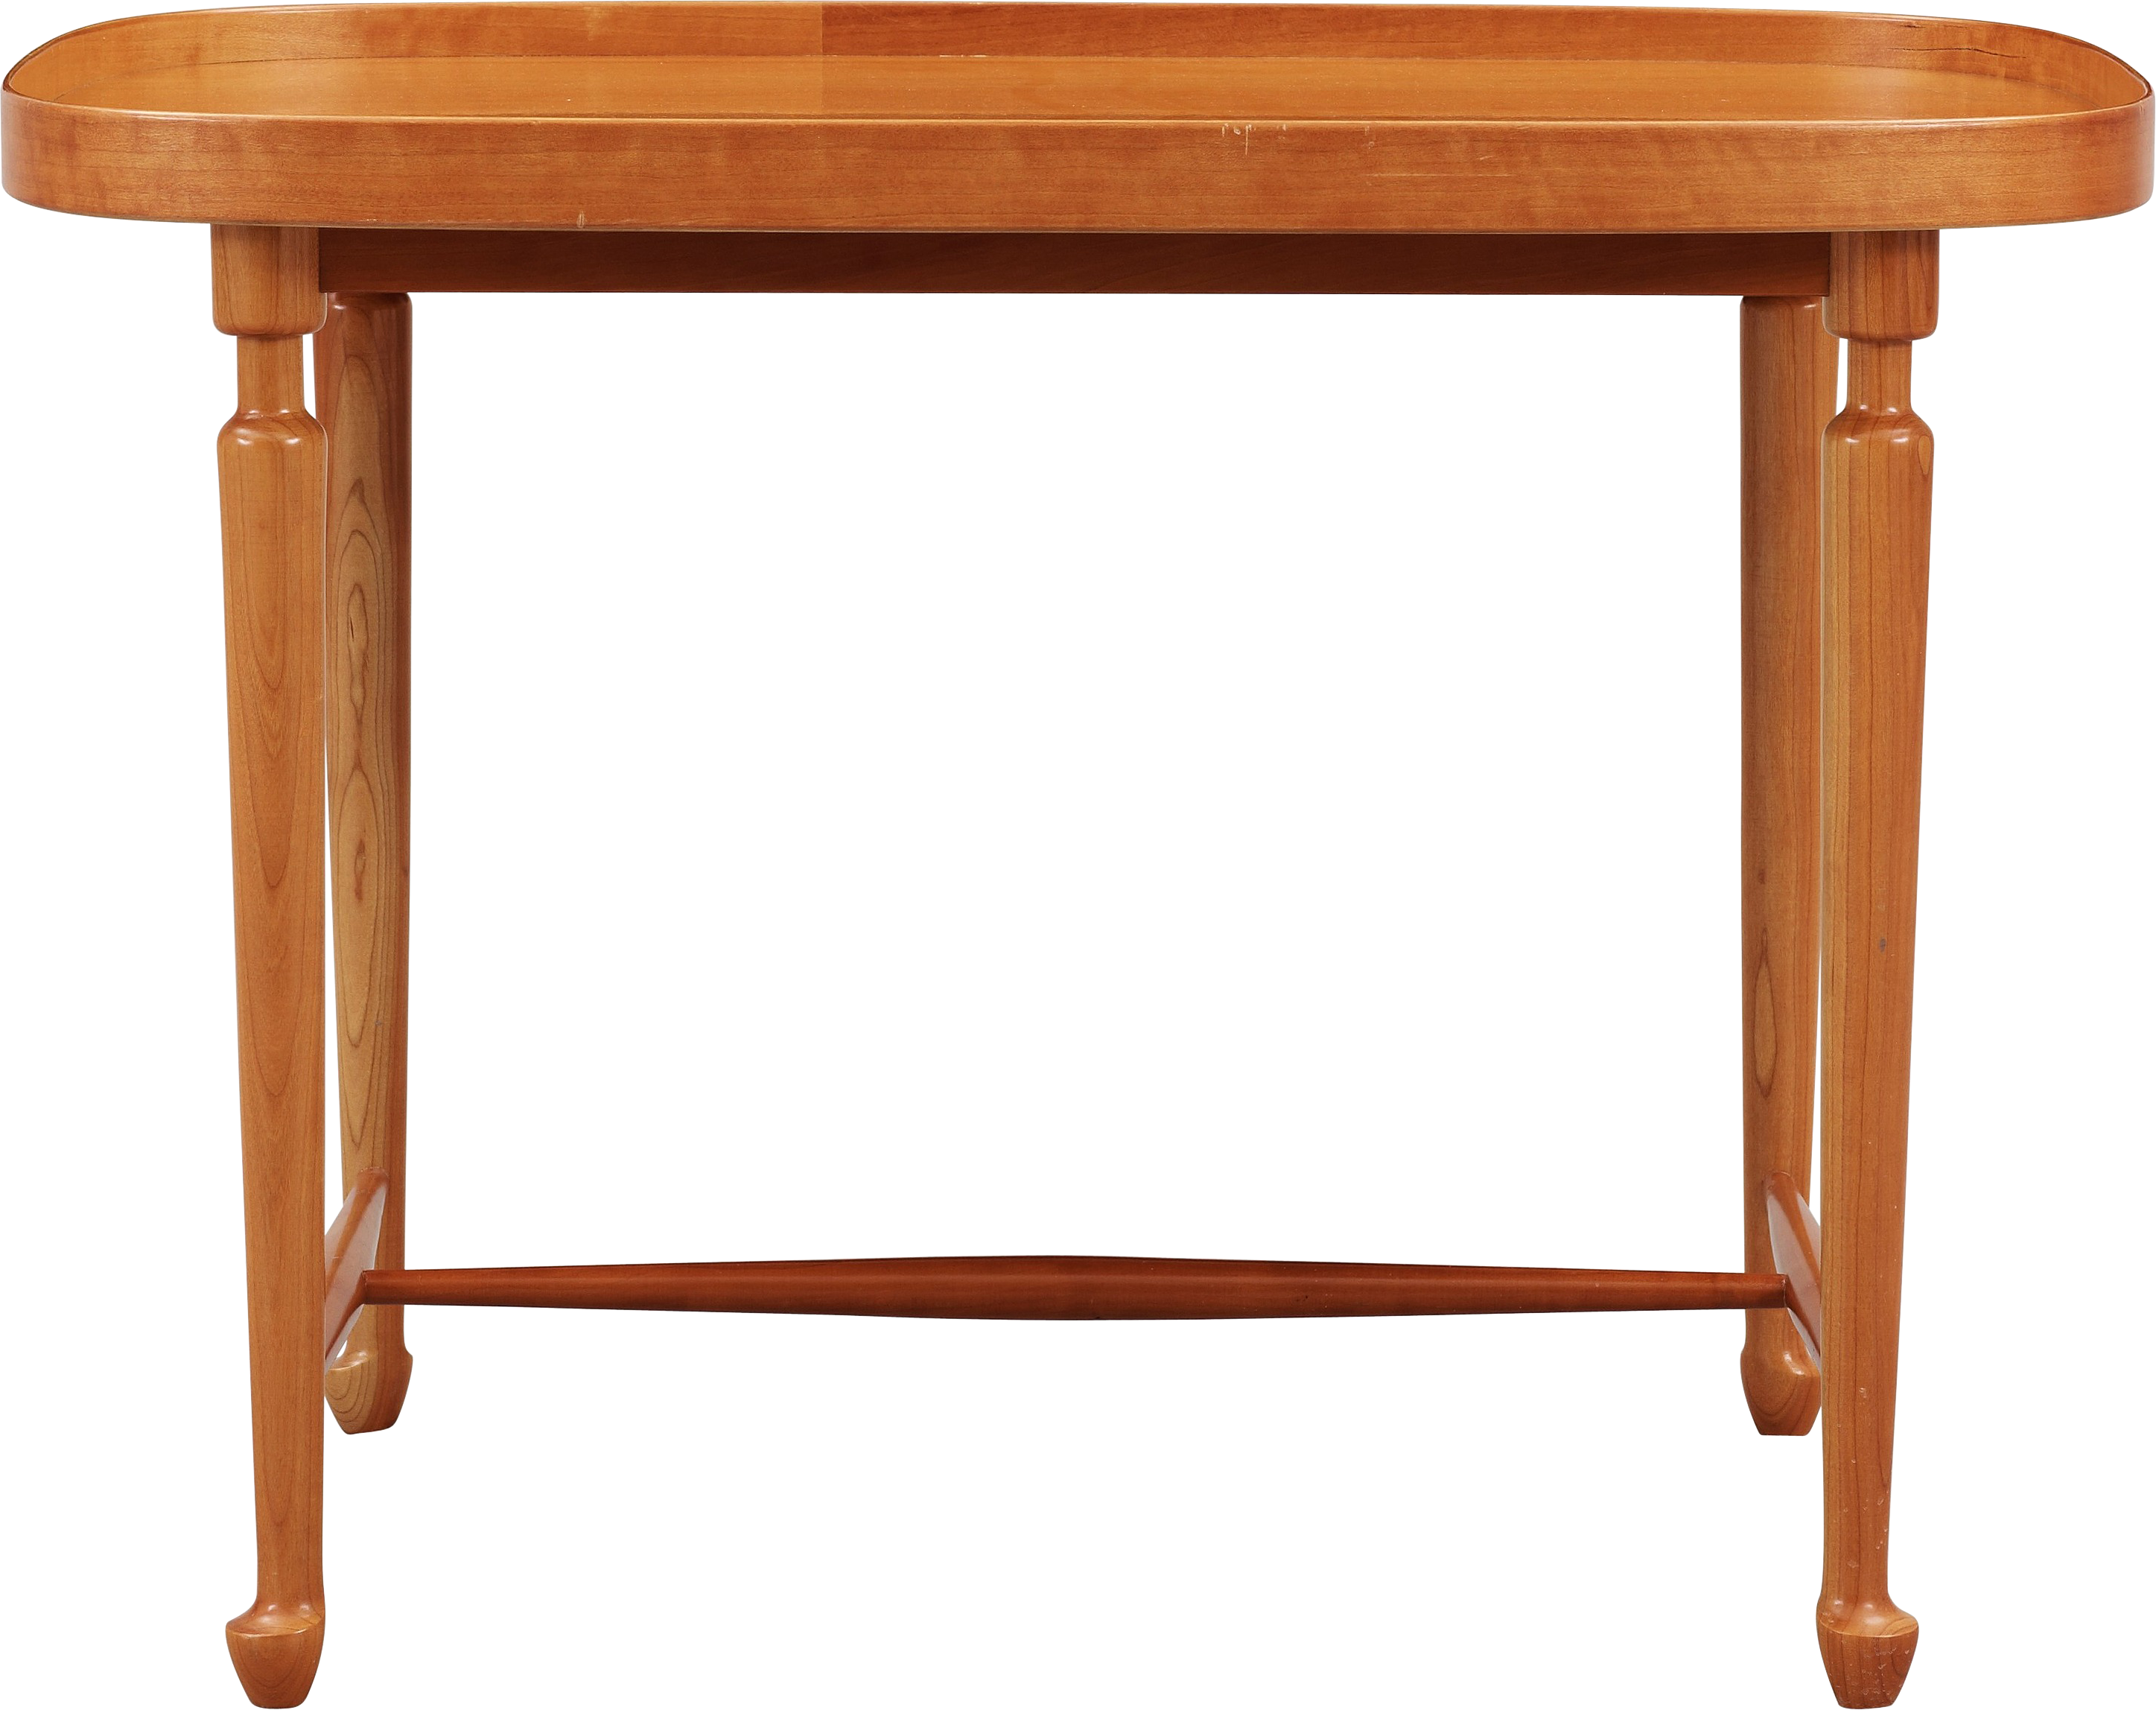 Table Png Image Transparent Image Download, Size: 2895x2296px Throughout Transparent Side Tables For Living Rooms (Gallery 20 of 20)